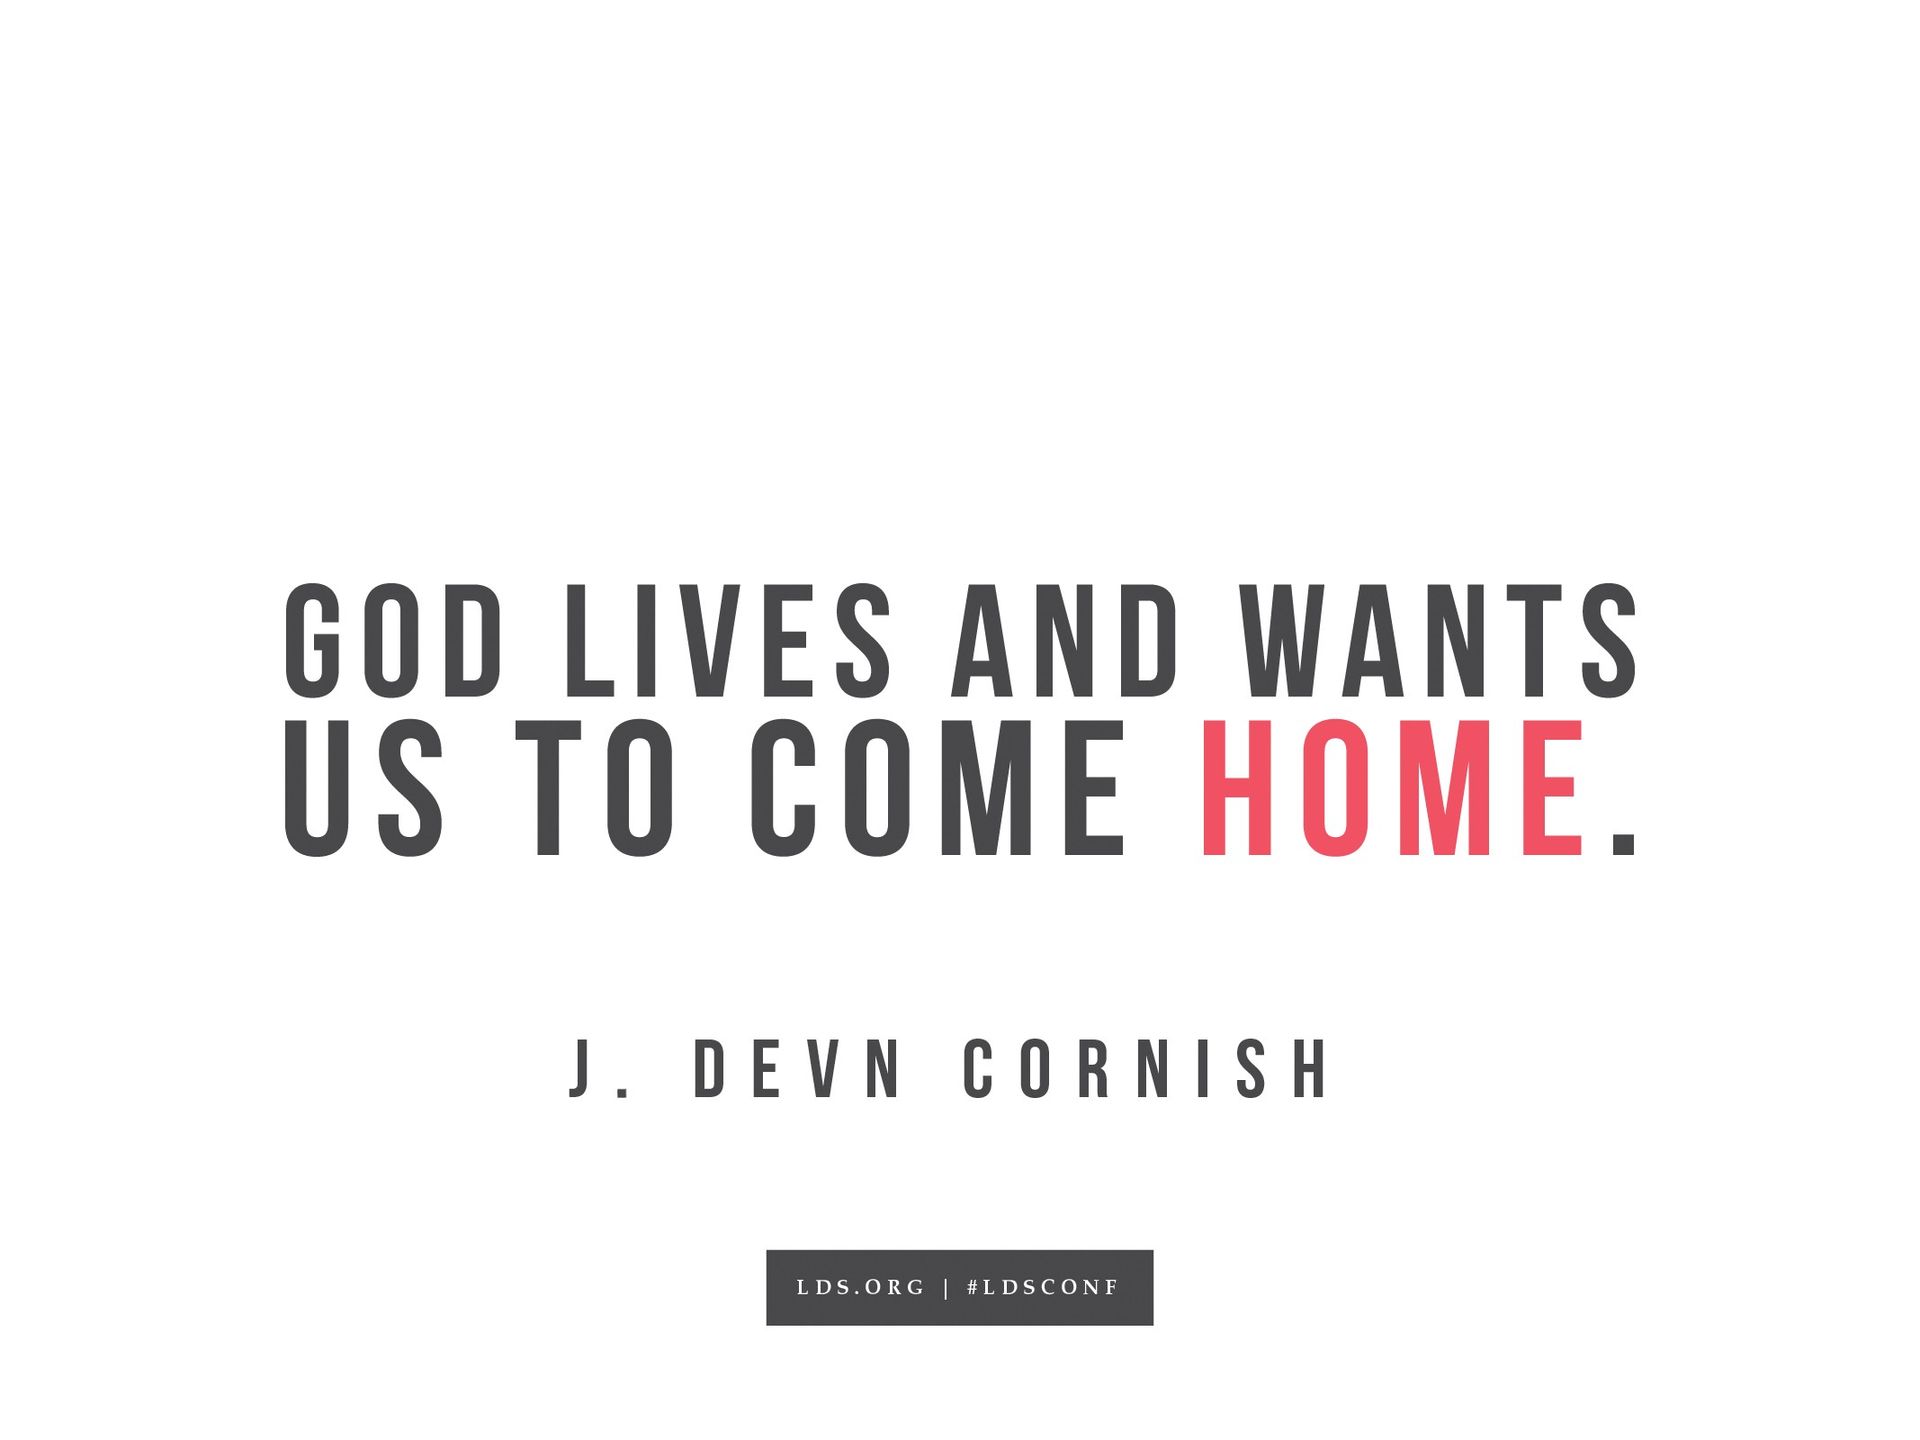 “God lives and wants us to come home.”—J. Devn Cornish, “Am I Good Enough? Will I Make It?”